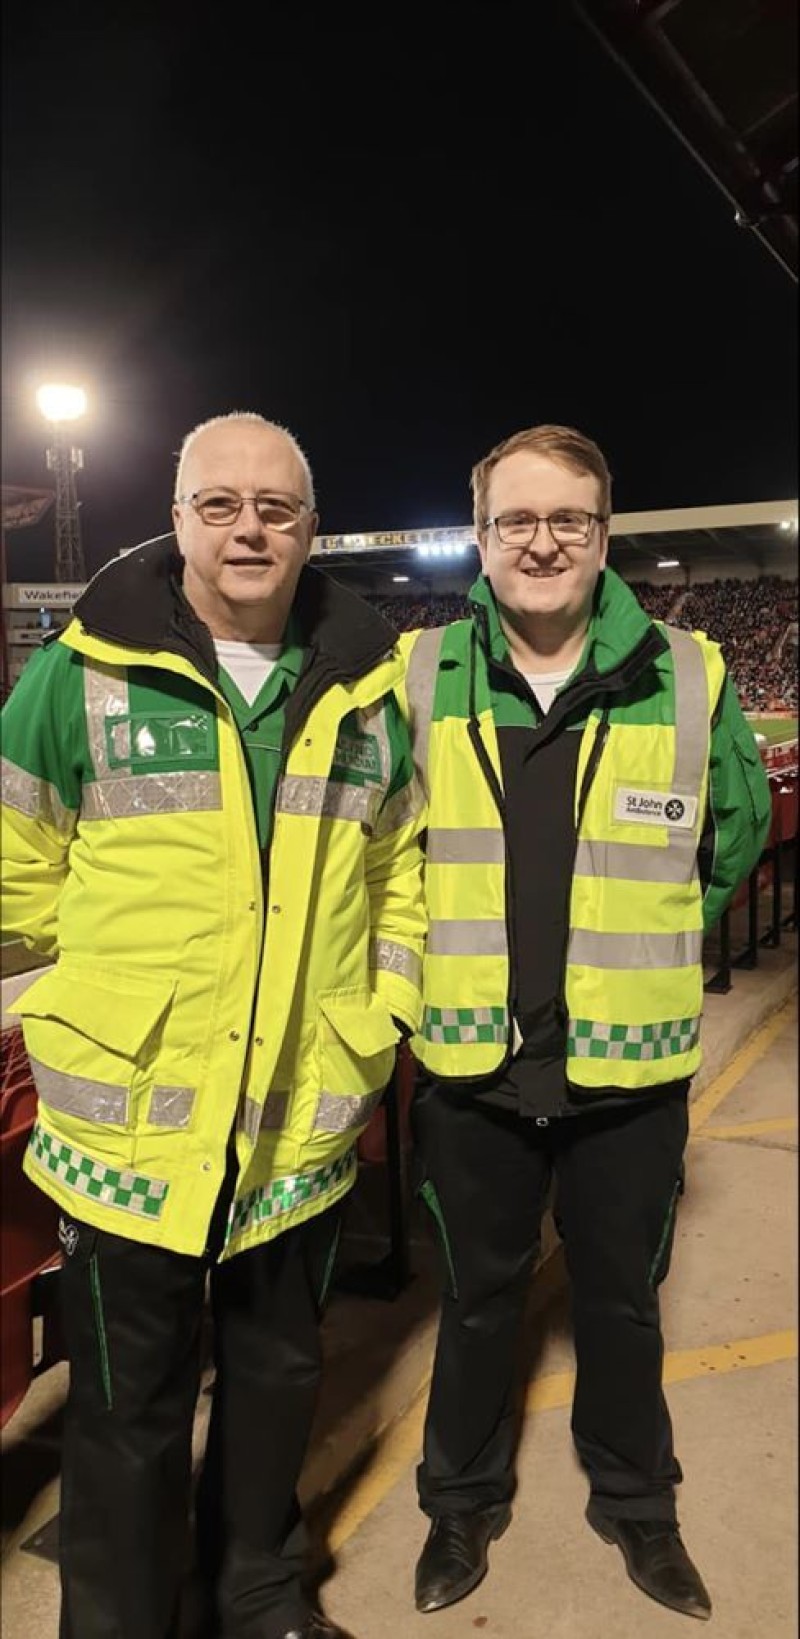 Main image for Volunteer with St John Ambulance forced to quit